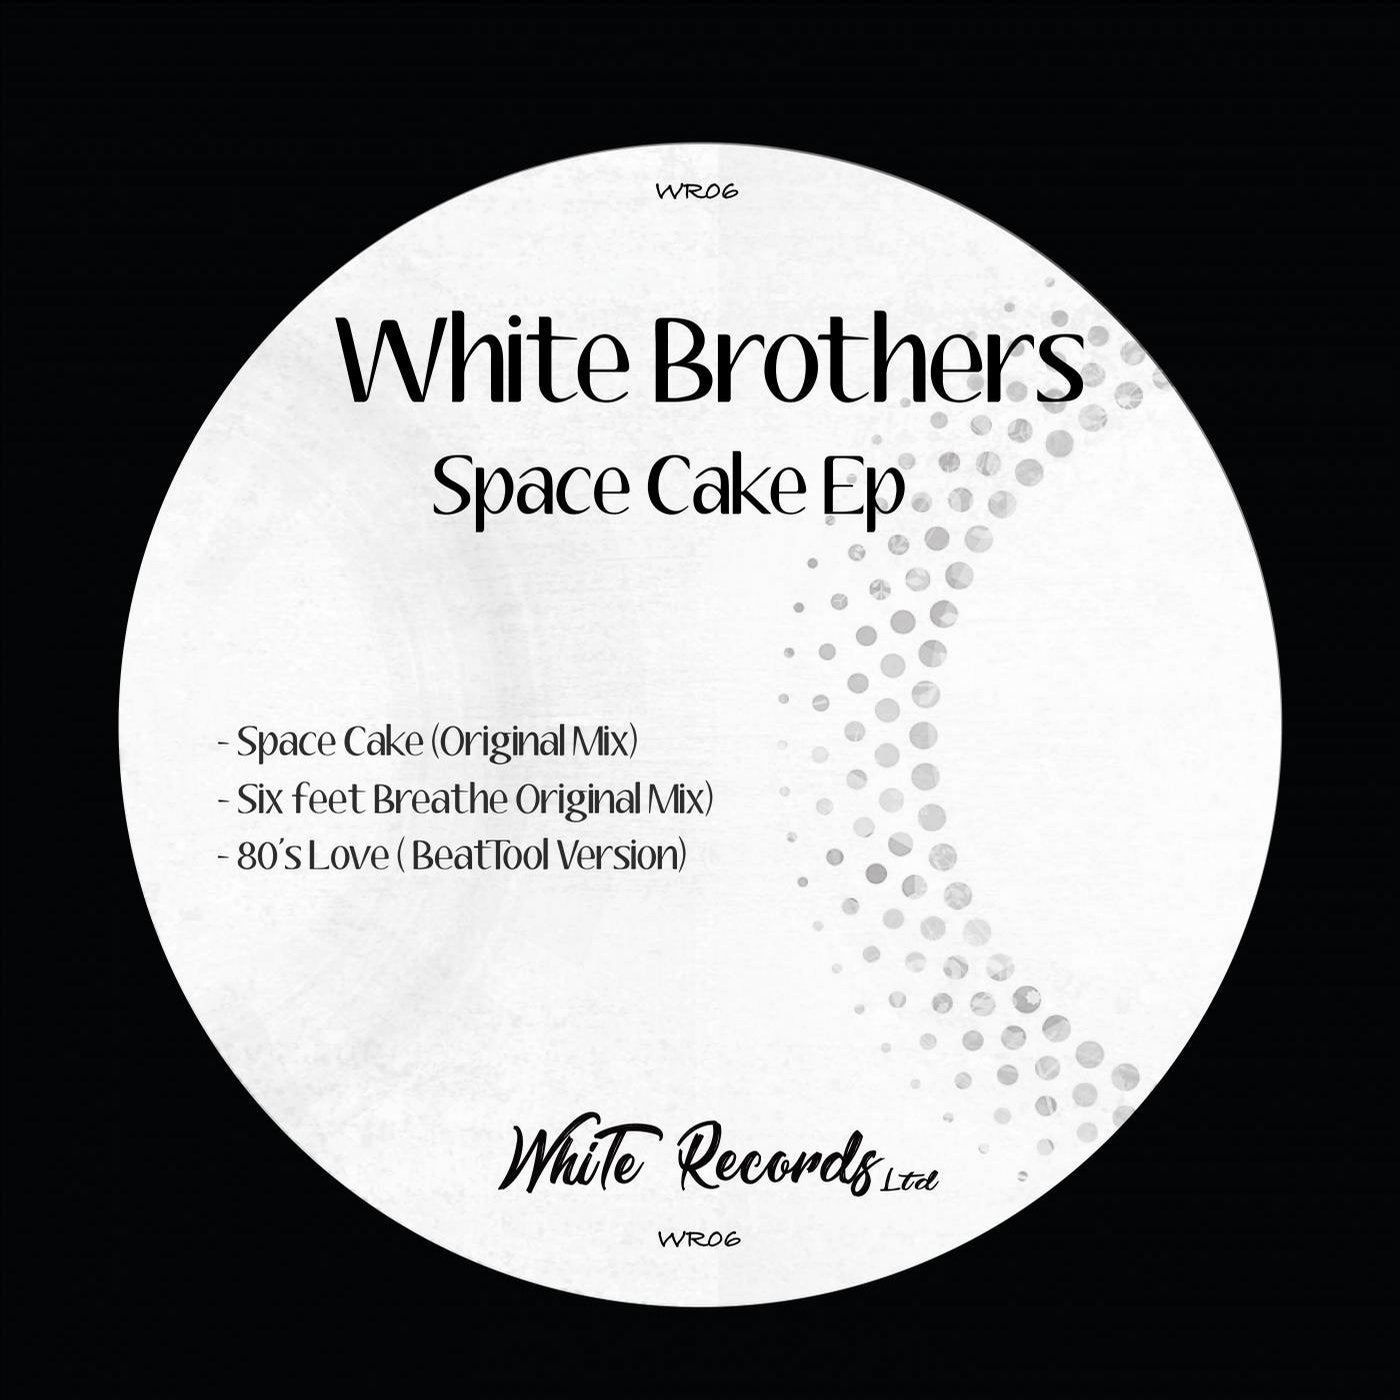 Space Cake Ep